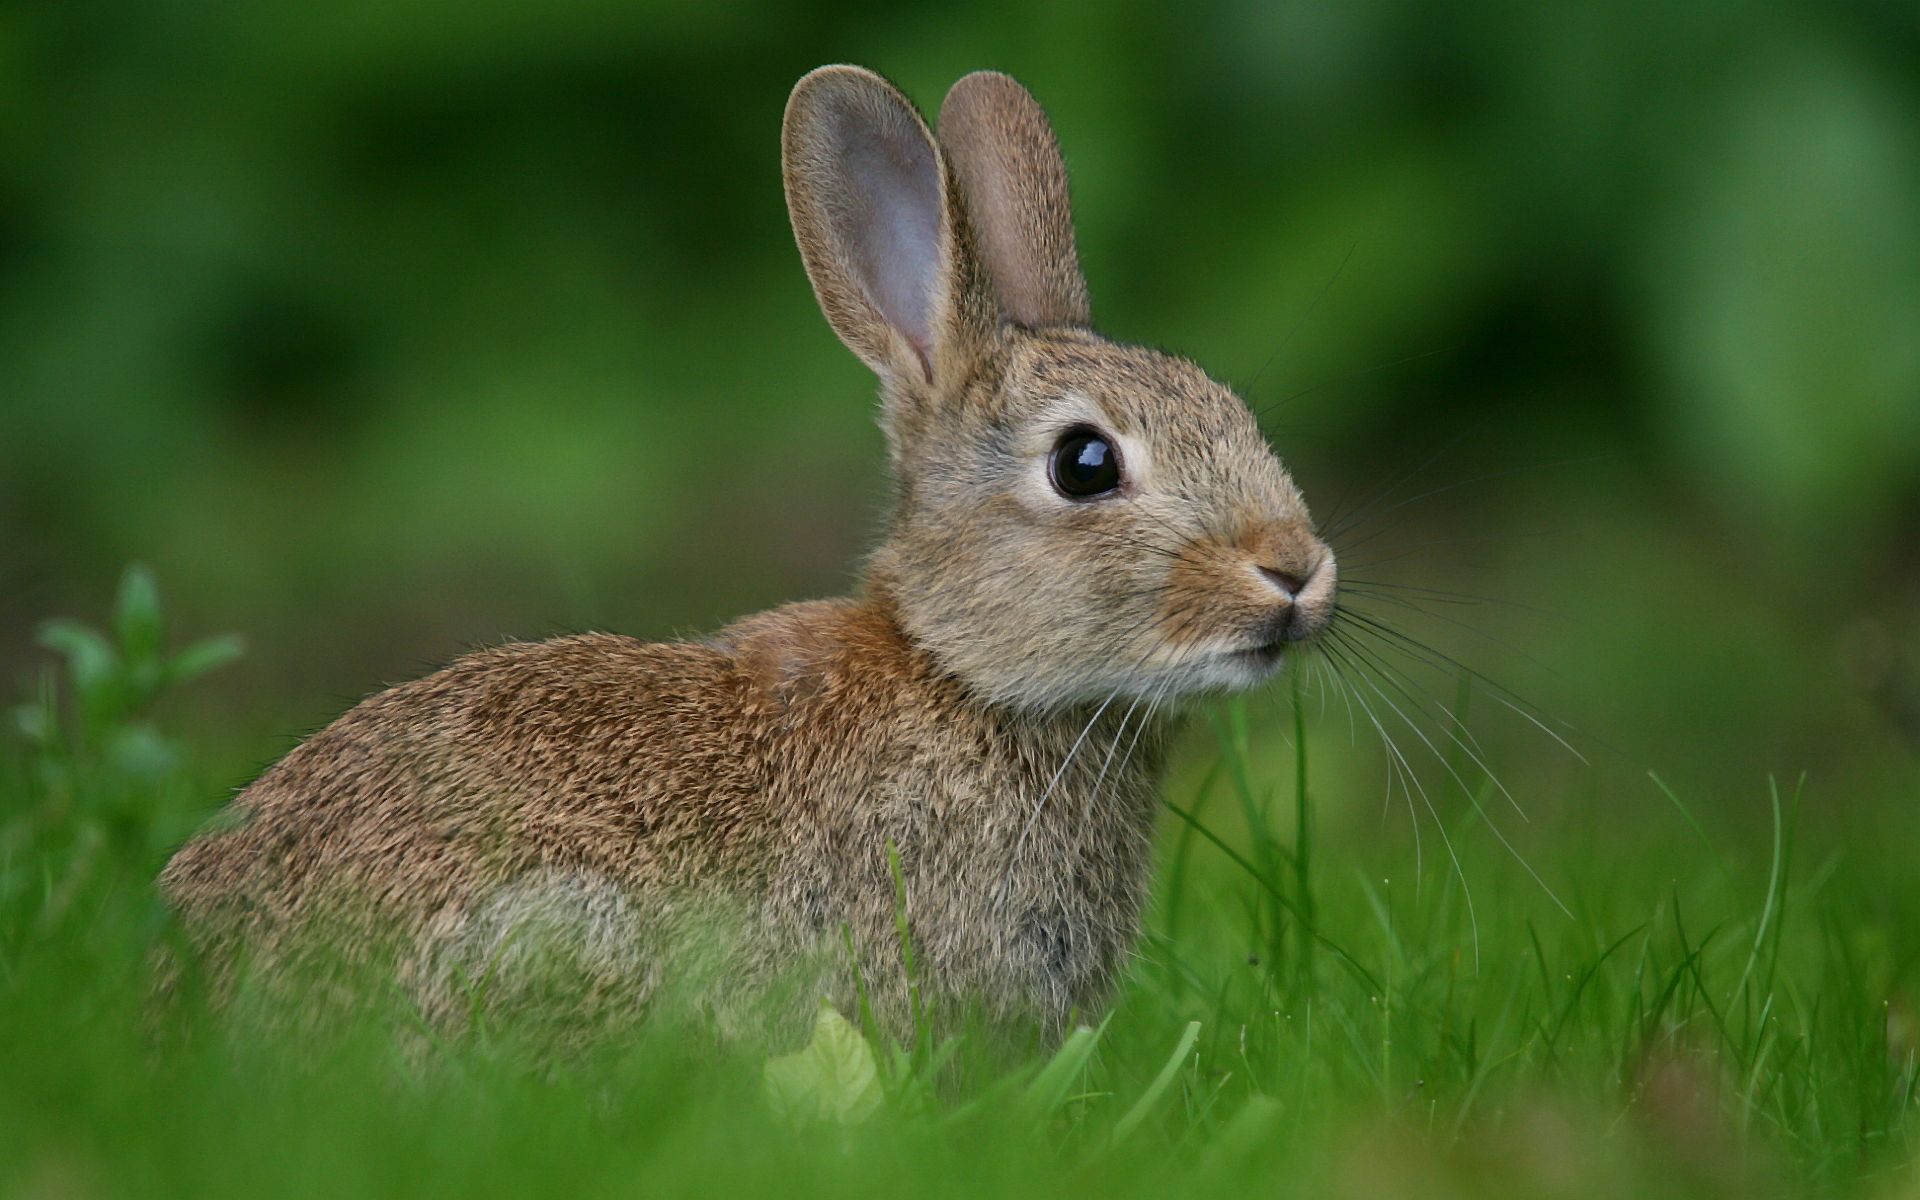 a small rabbit is sitting in the grass and looking at the camera